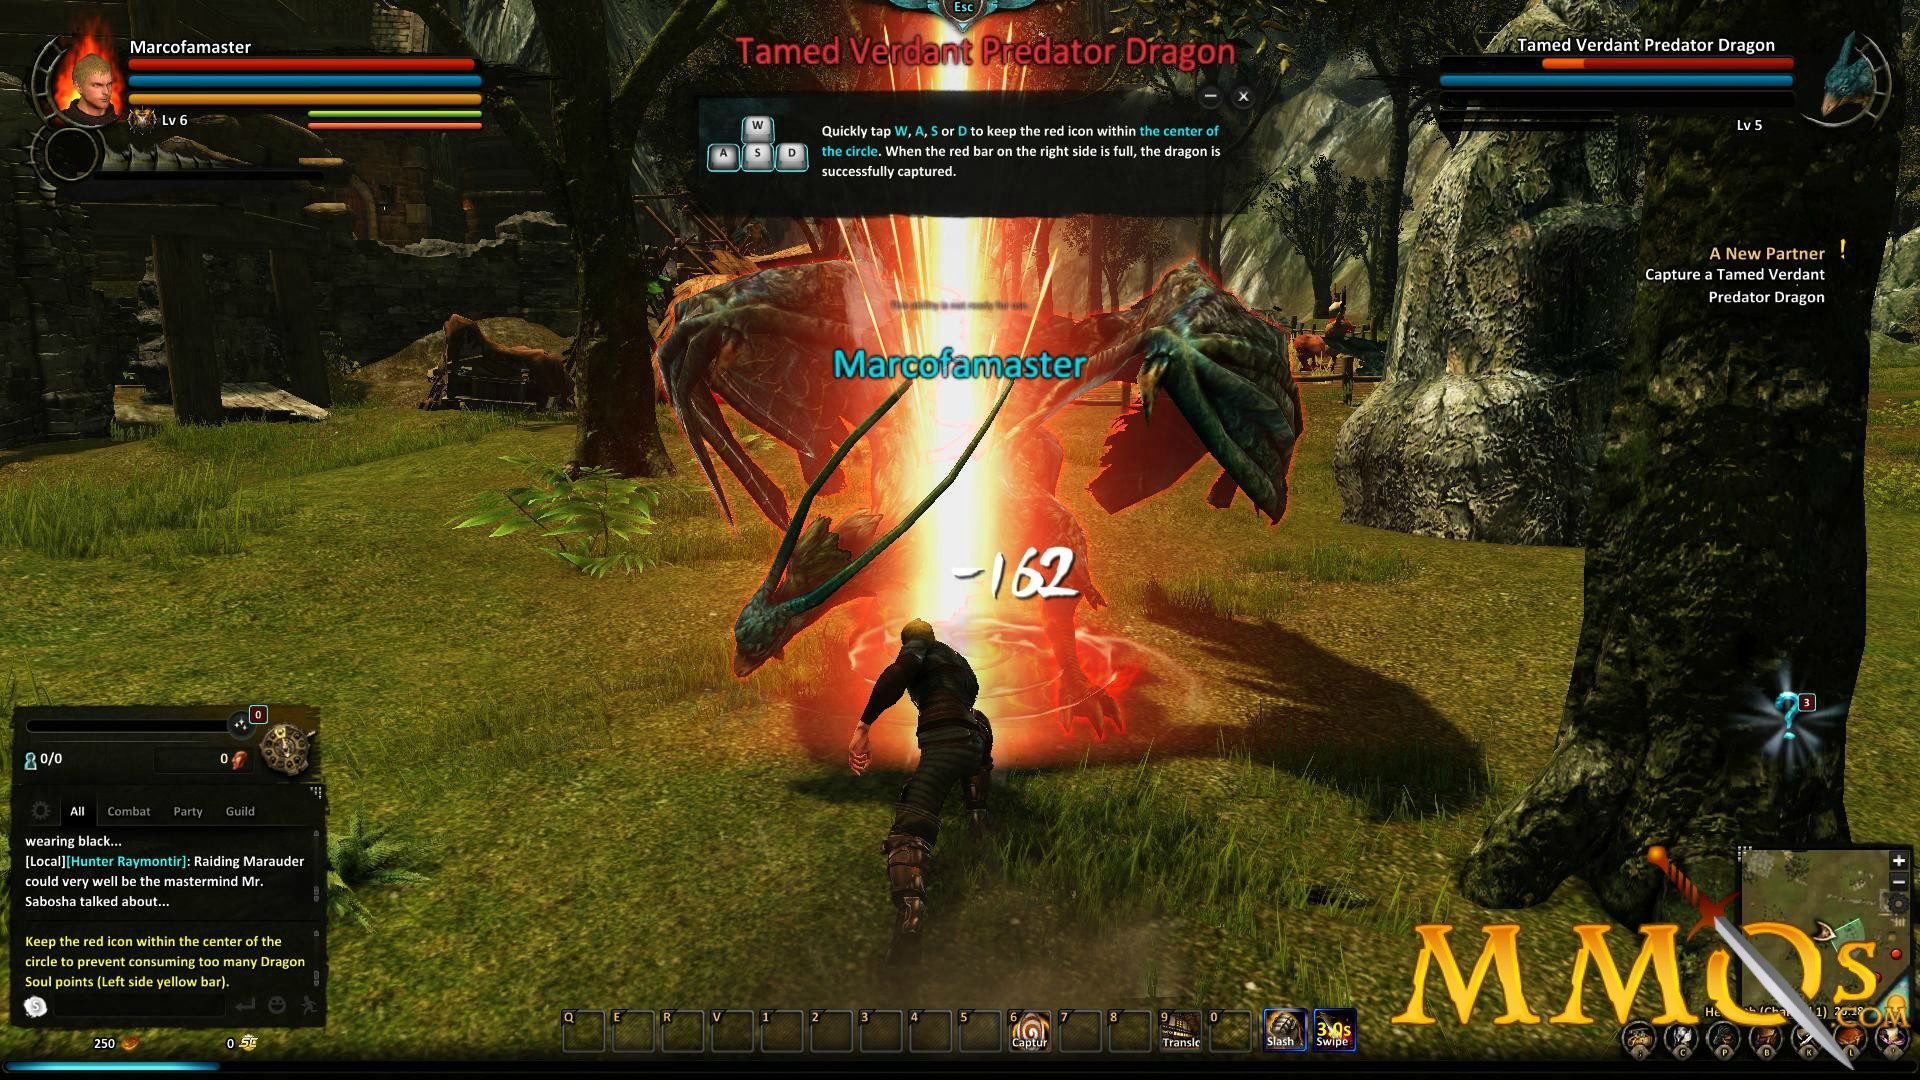 Free-to-Play MMO “Dragon's Prophet” Enters Open Beta In North America